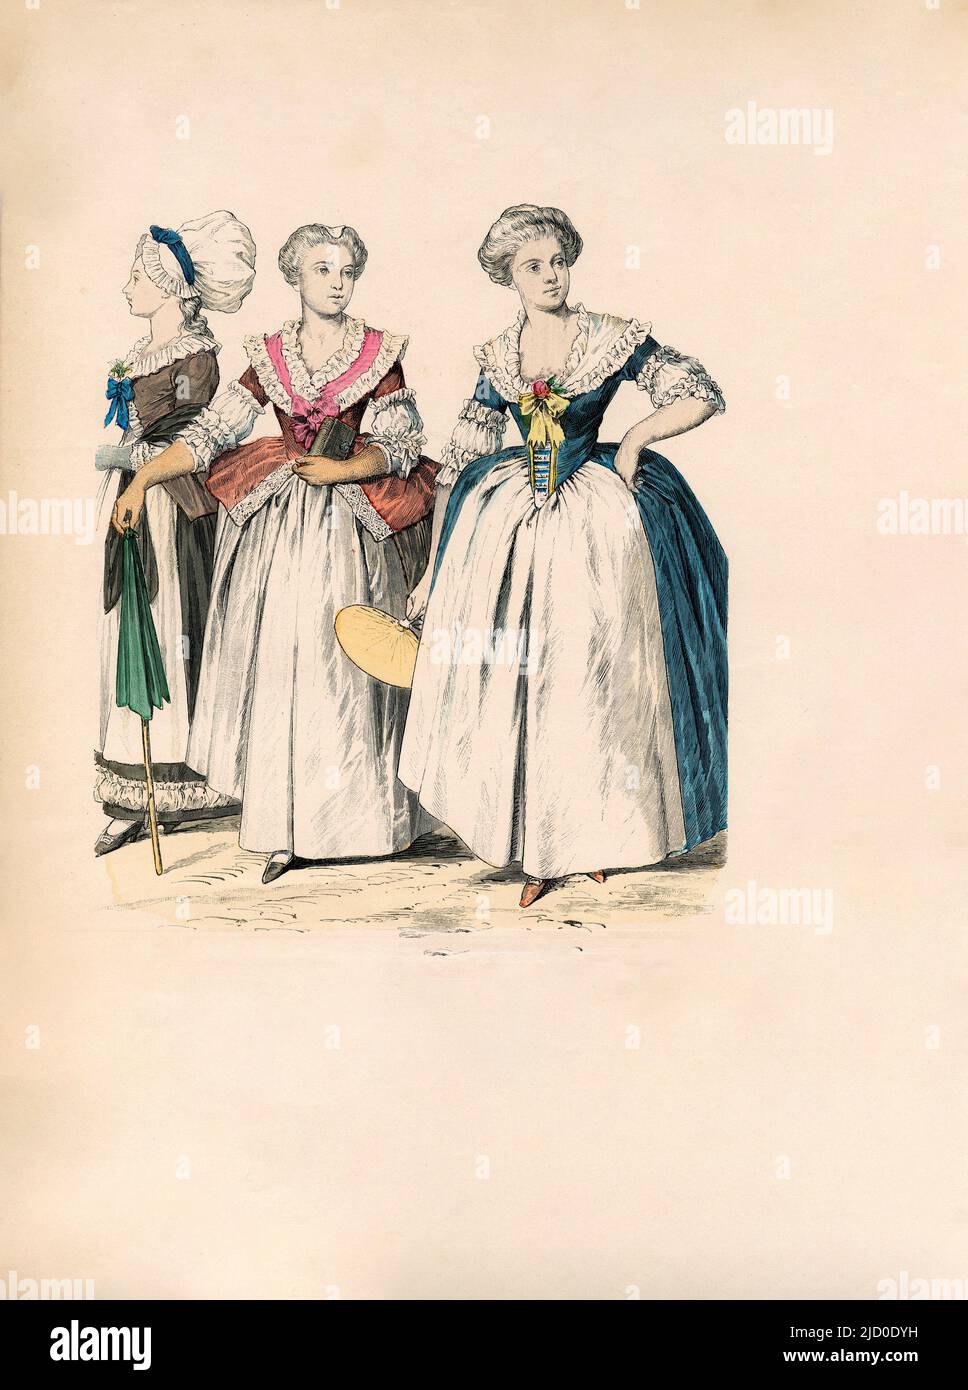 German Middle Class, Women from Mannheim, German and French Dress in Strasbourg, 1770-1790, Illustration, The History of Costume, Braun & Schneider, Munich, Germany, 1861-1880 Stock Photo